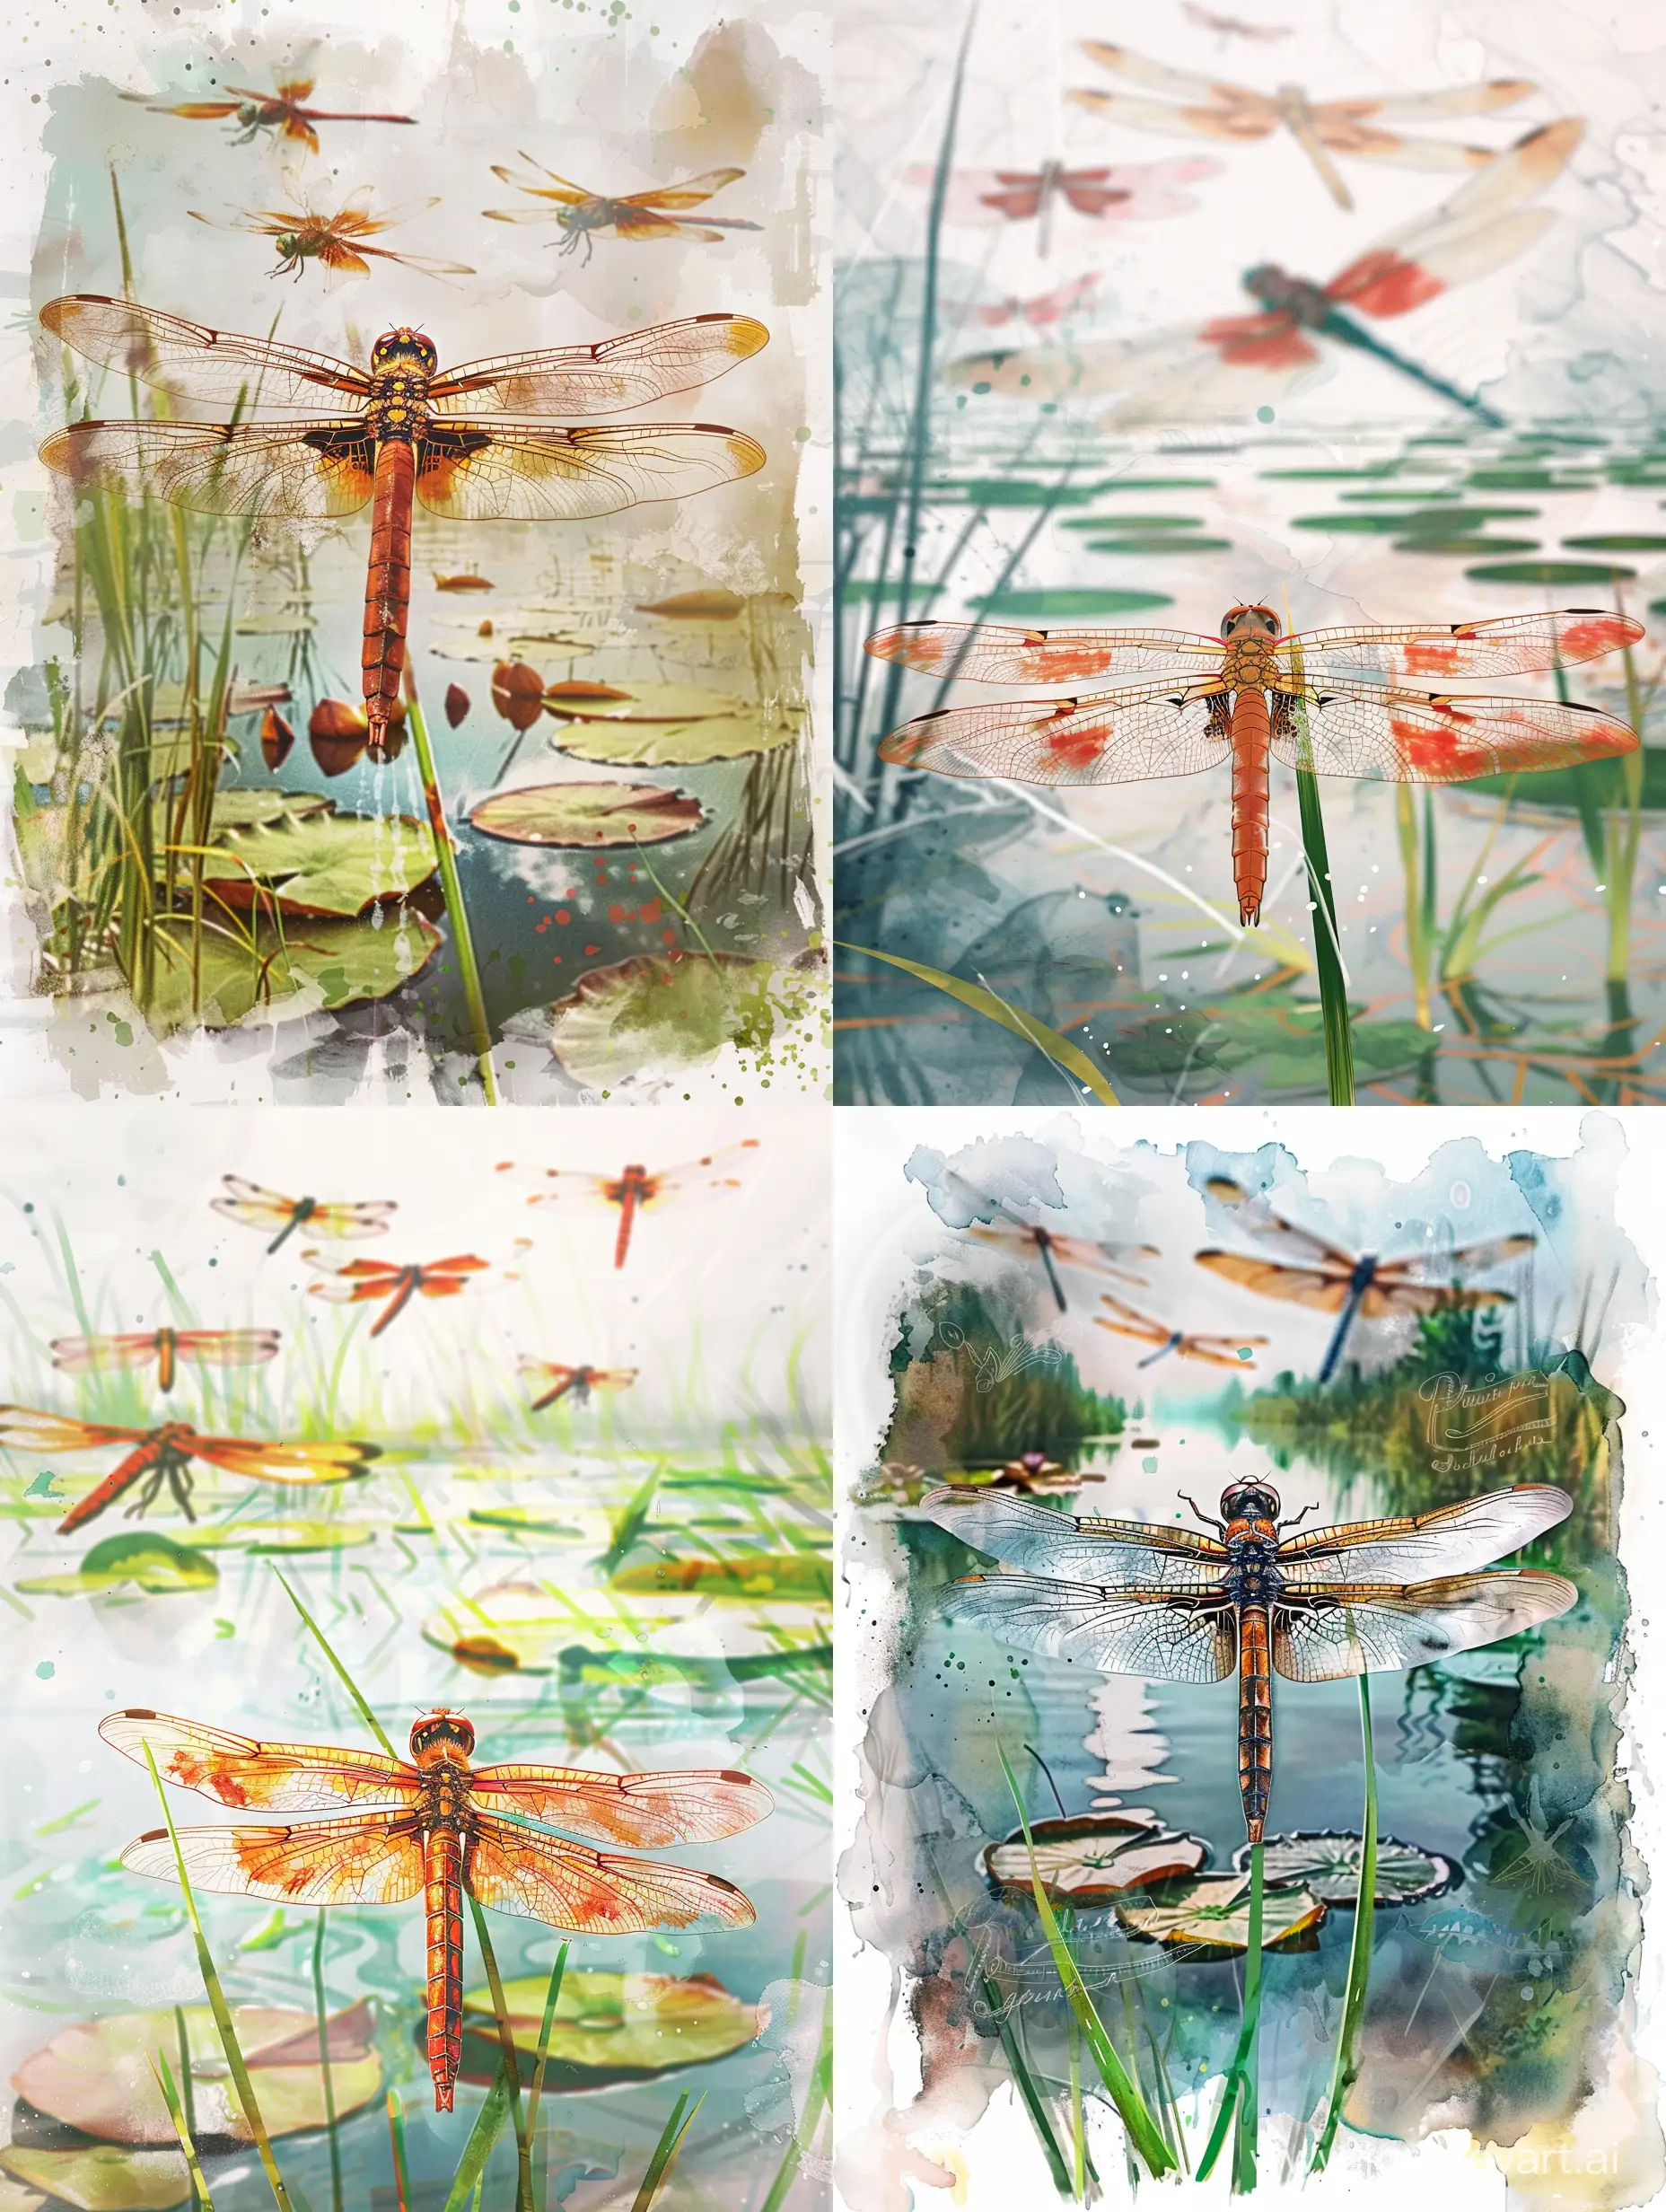 Dragonfly-Sitting-on-Blade-of-Grass-in-Watercolor-Style